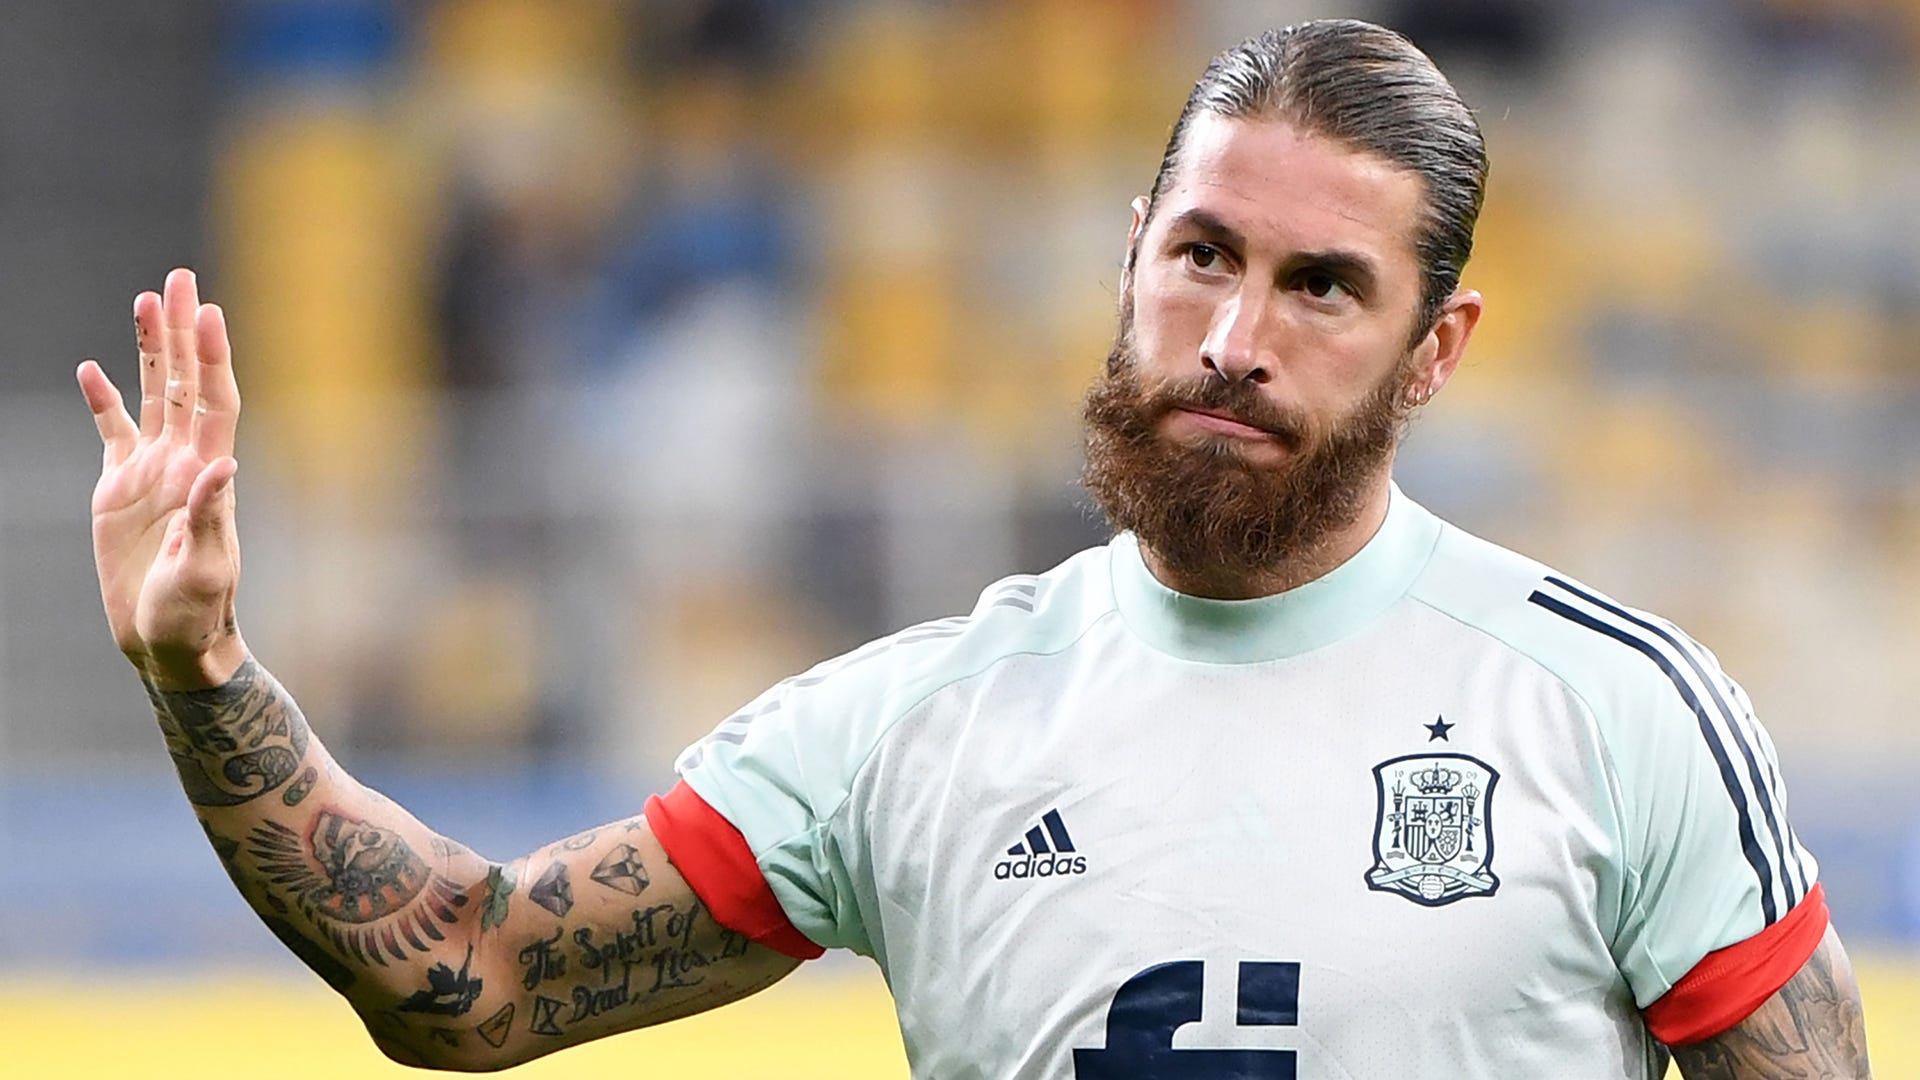 Thank you from the bottom of my heart!' - Spain legend Sergio Ramos retires from international football after trophy filled career | Goal.com India